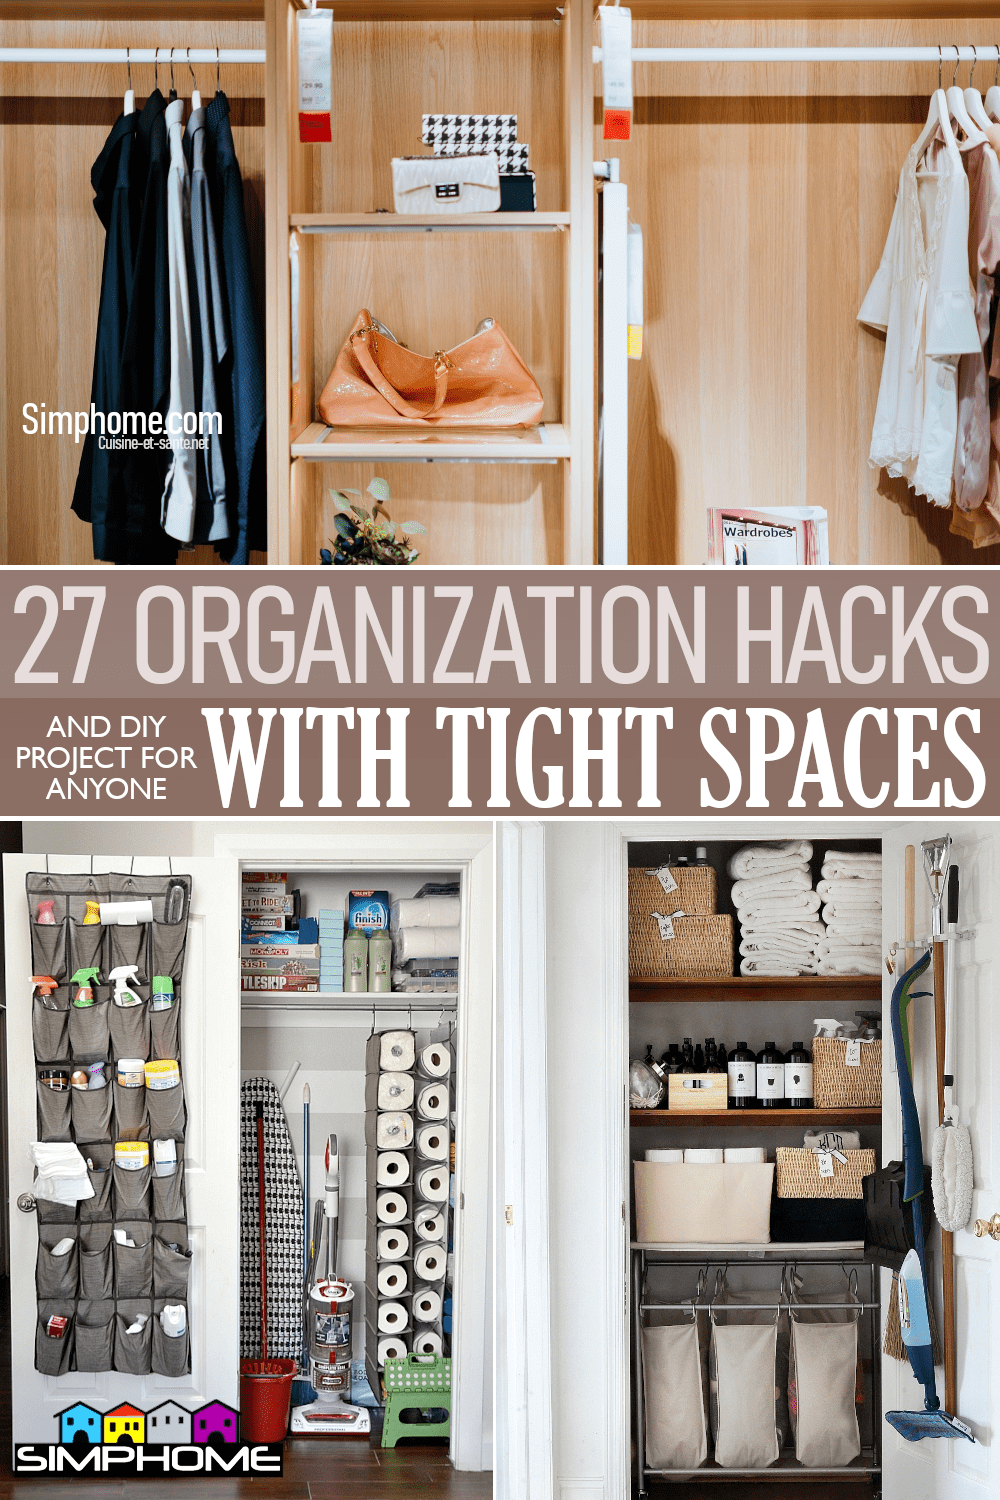 27 Organization Hacks for Small Space You Need To Know via Simphome.comFeatured